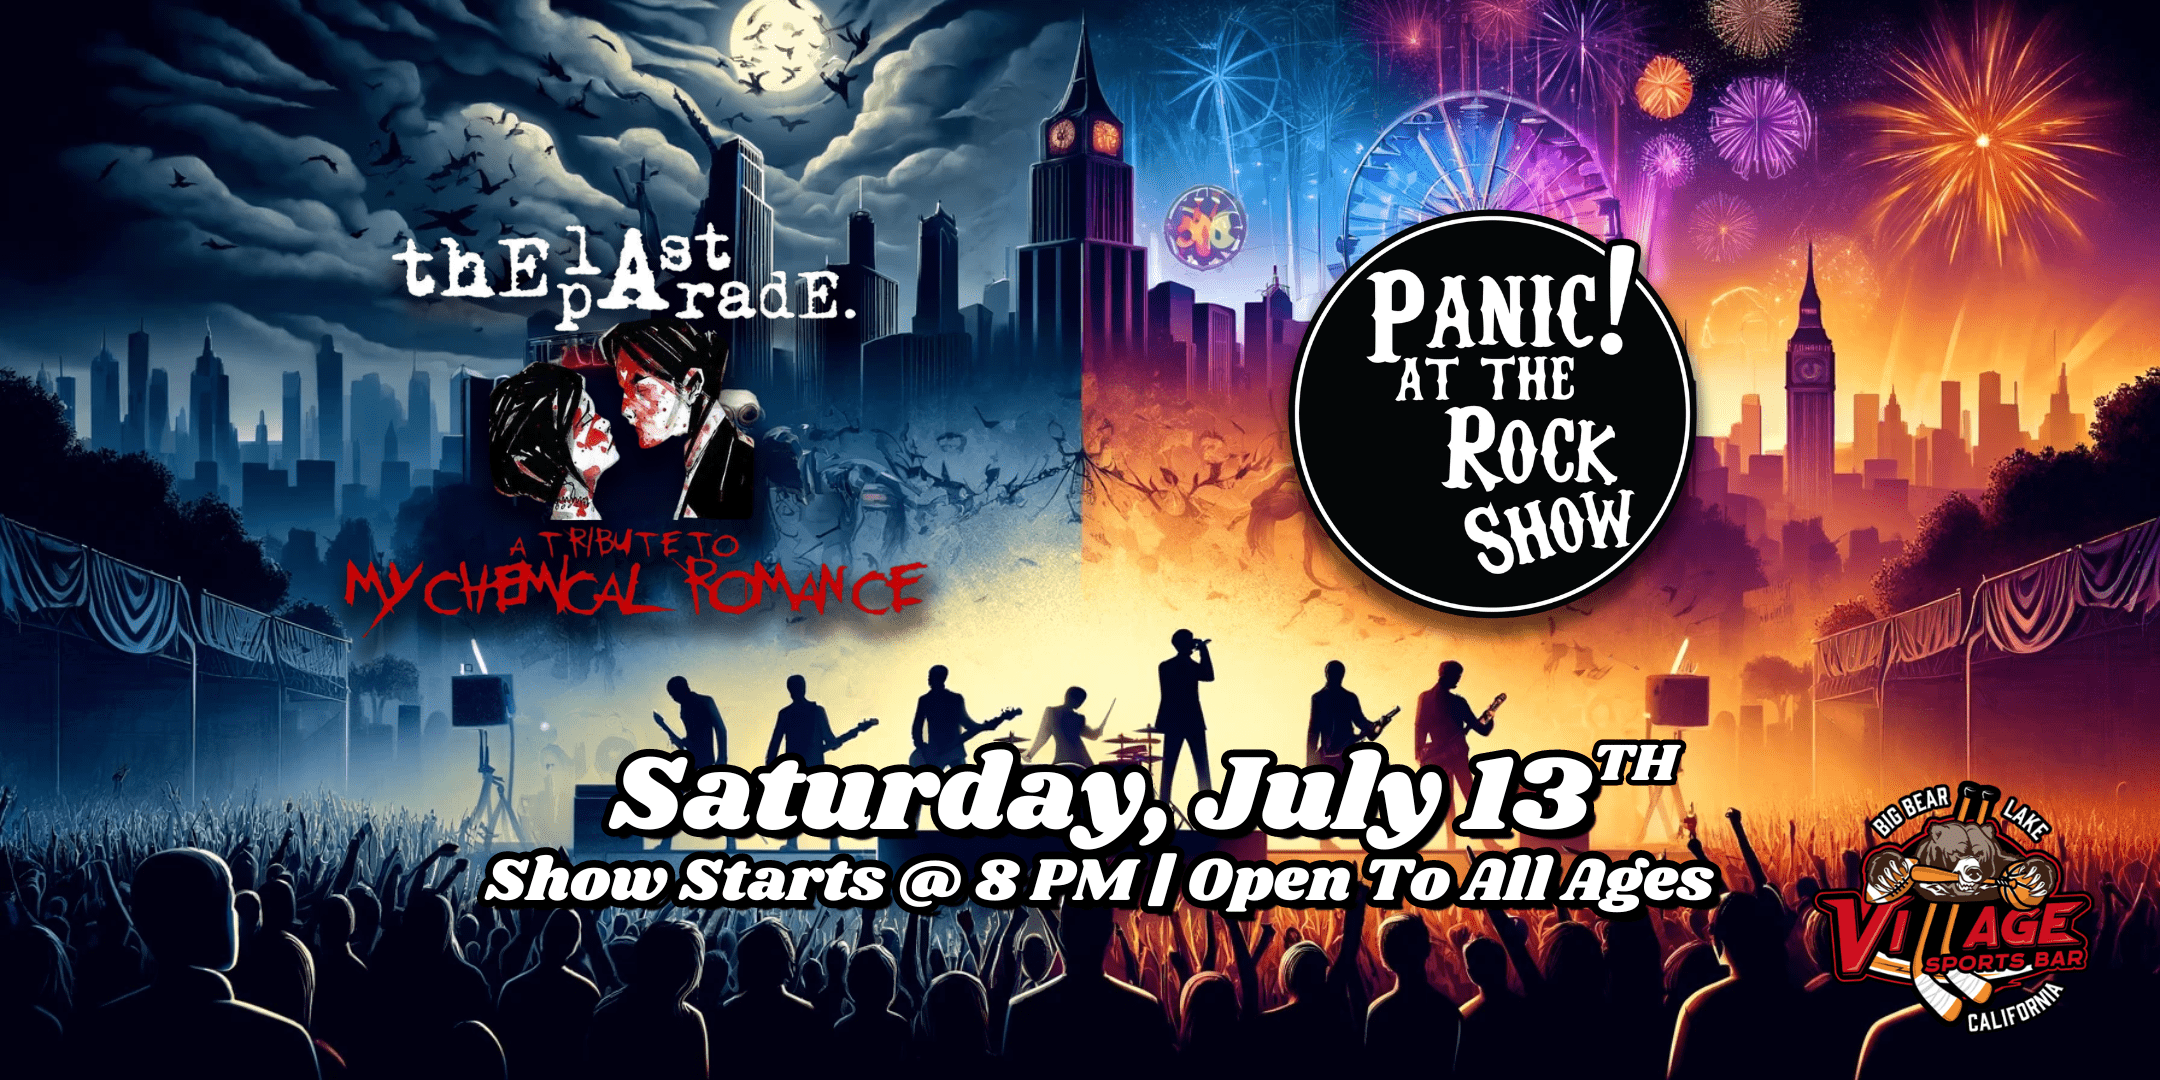 Village Sports Bar Presents: The Last Parade & Panic! At The Rock Show